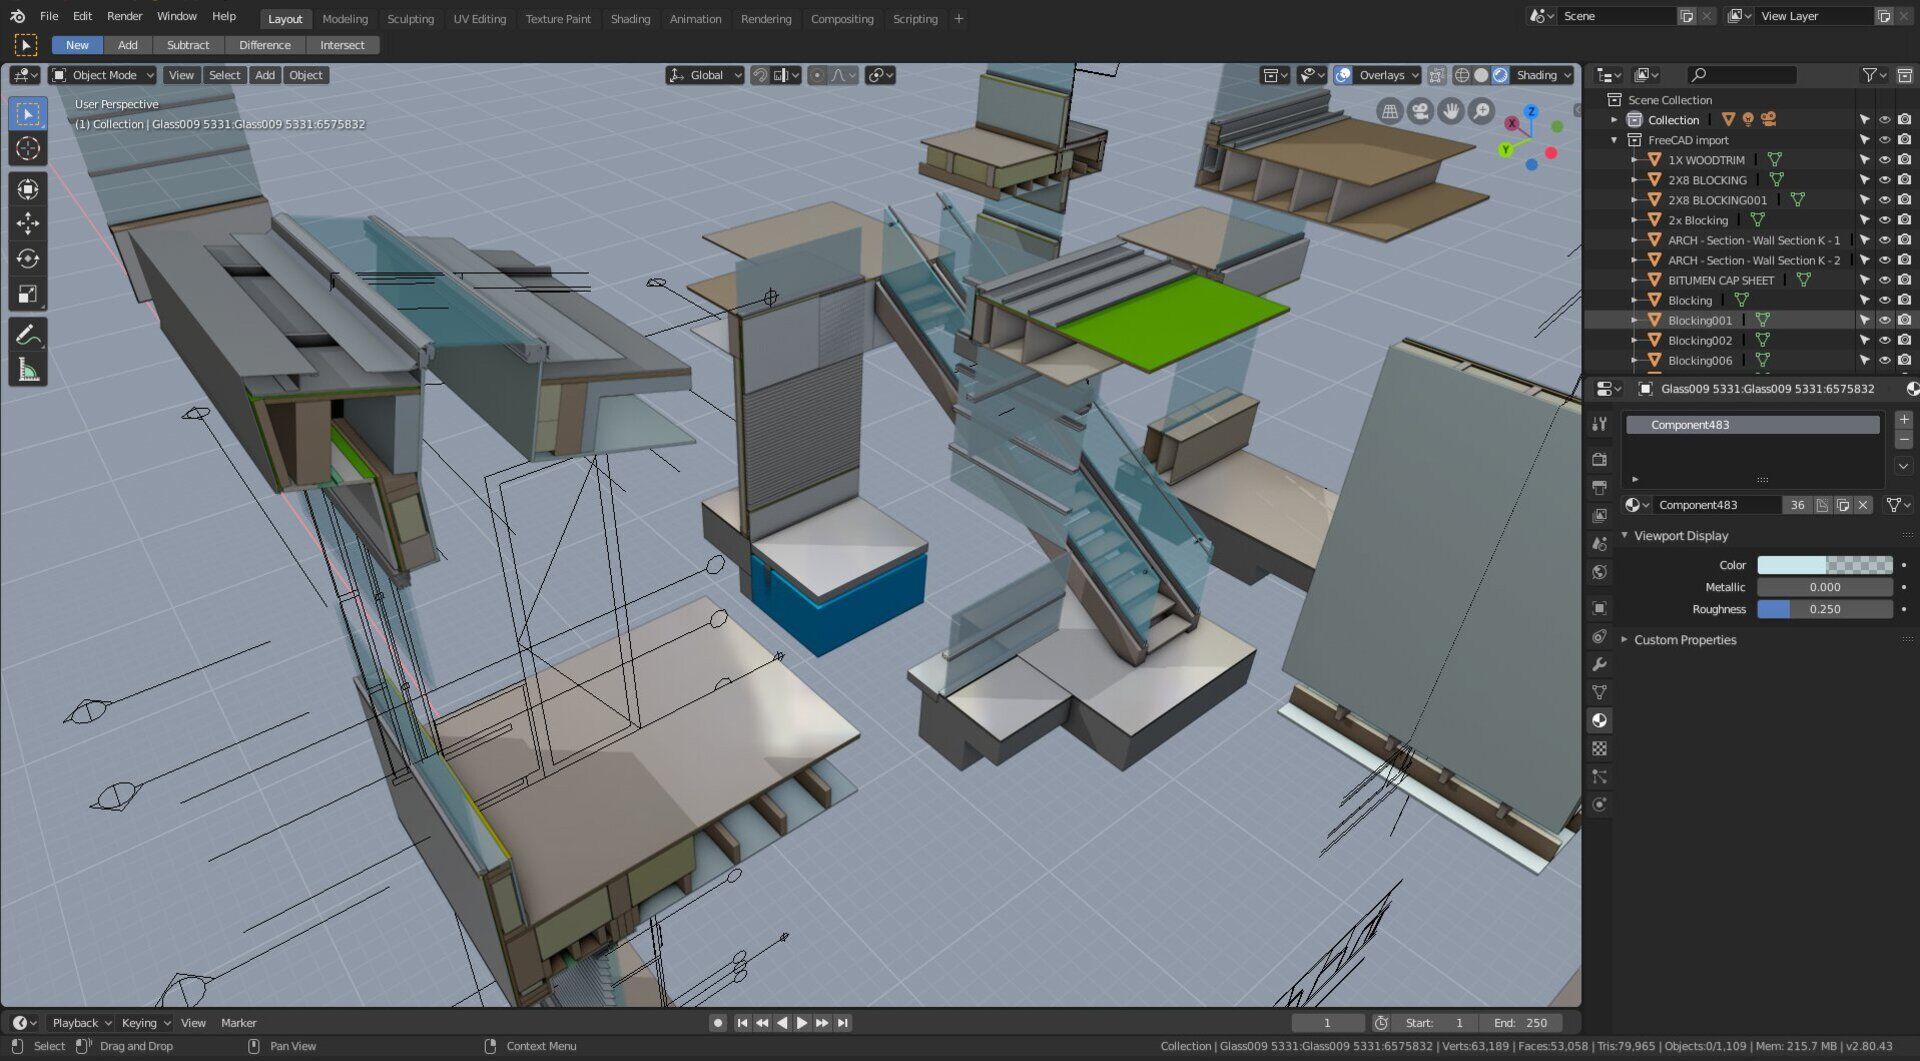 The new features of the Blender 3D
view